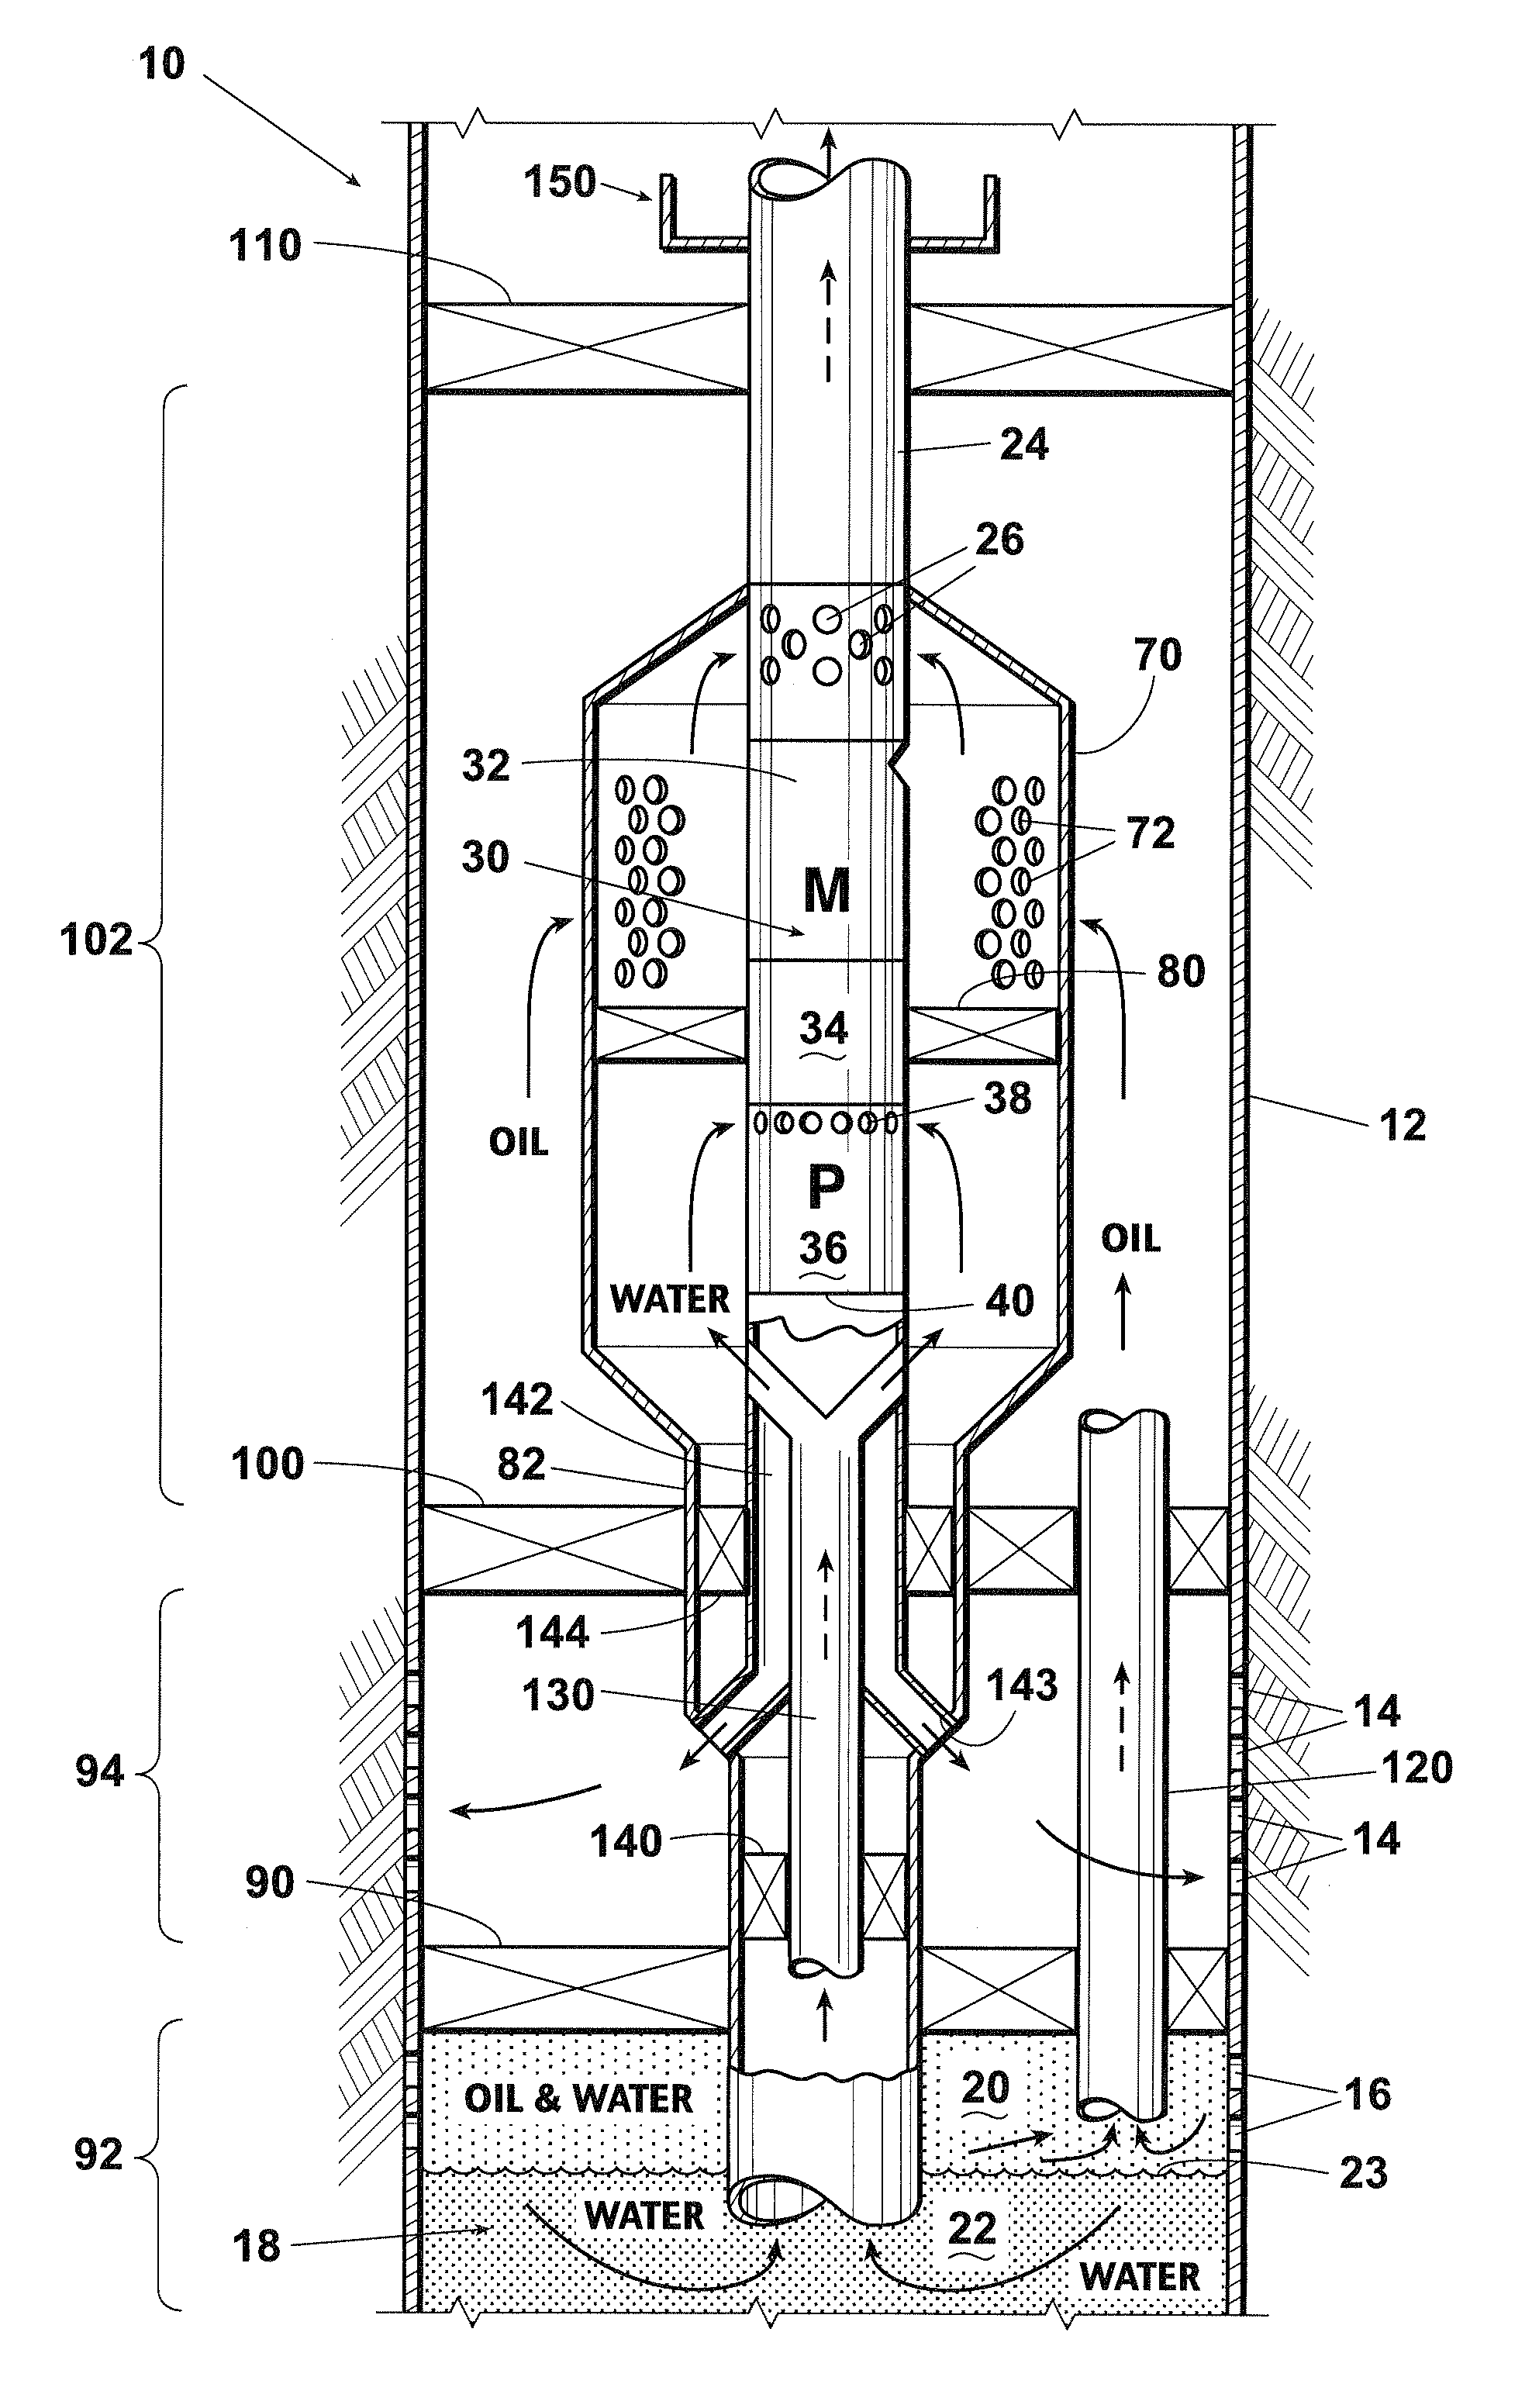 Inverted electrical submersible pump completion to maintain fluid segregation and ensure motor cooling in dual-stream well